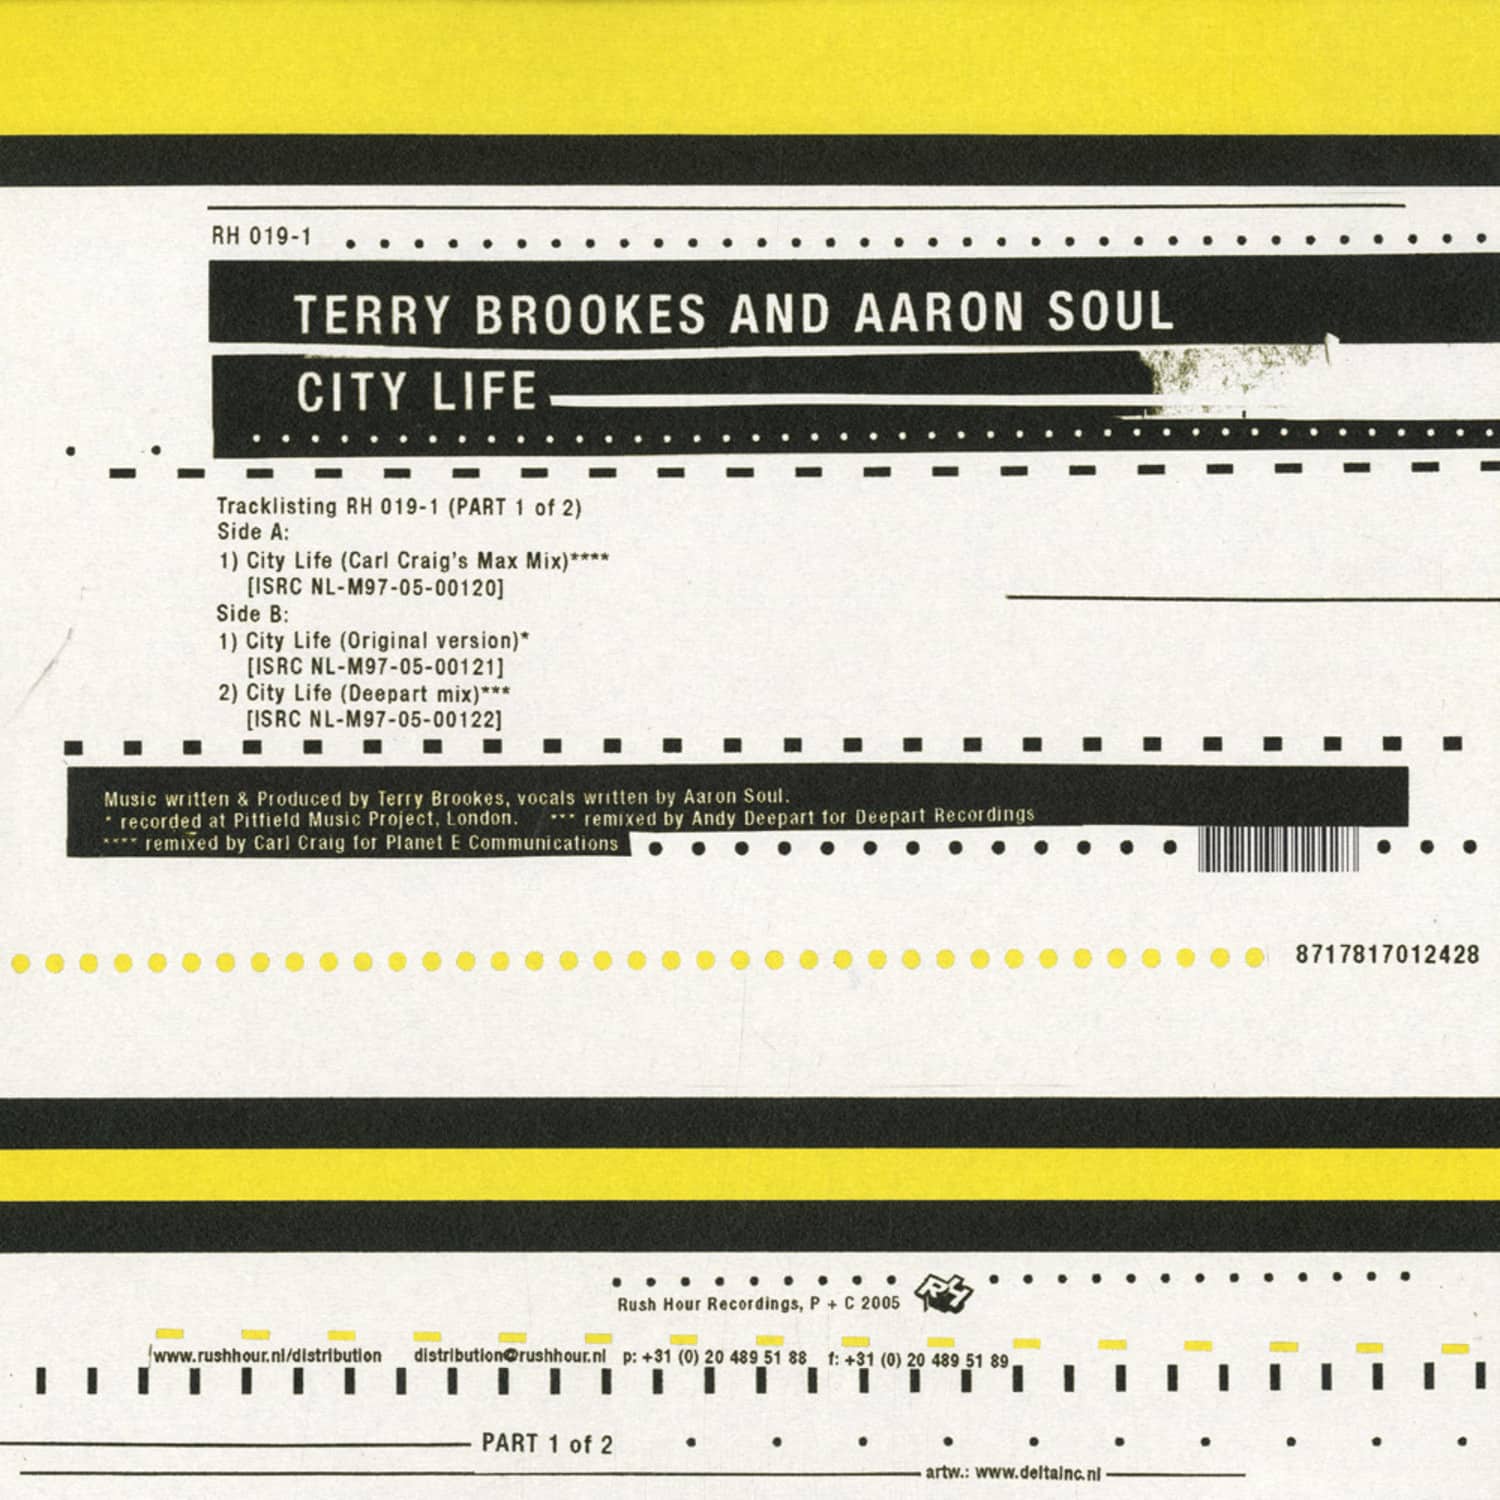 Terry Brookes and Aaron Soul - CITY LIFE